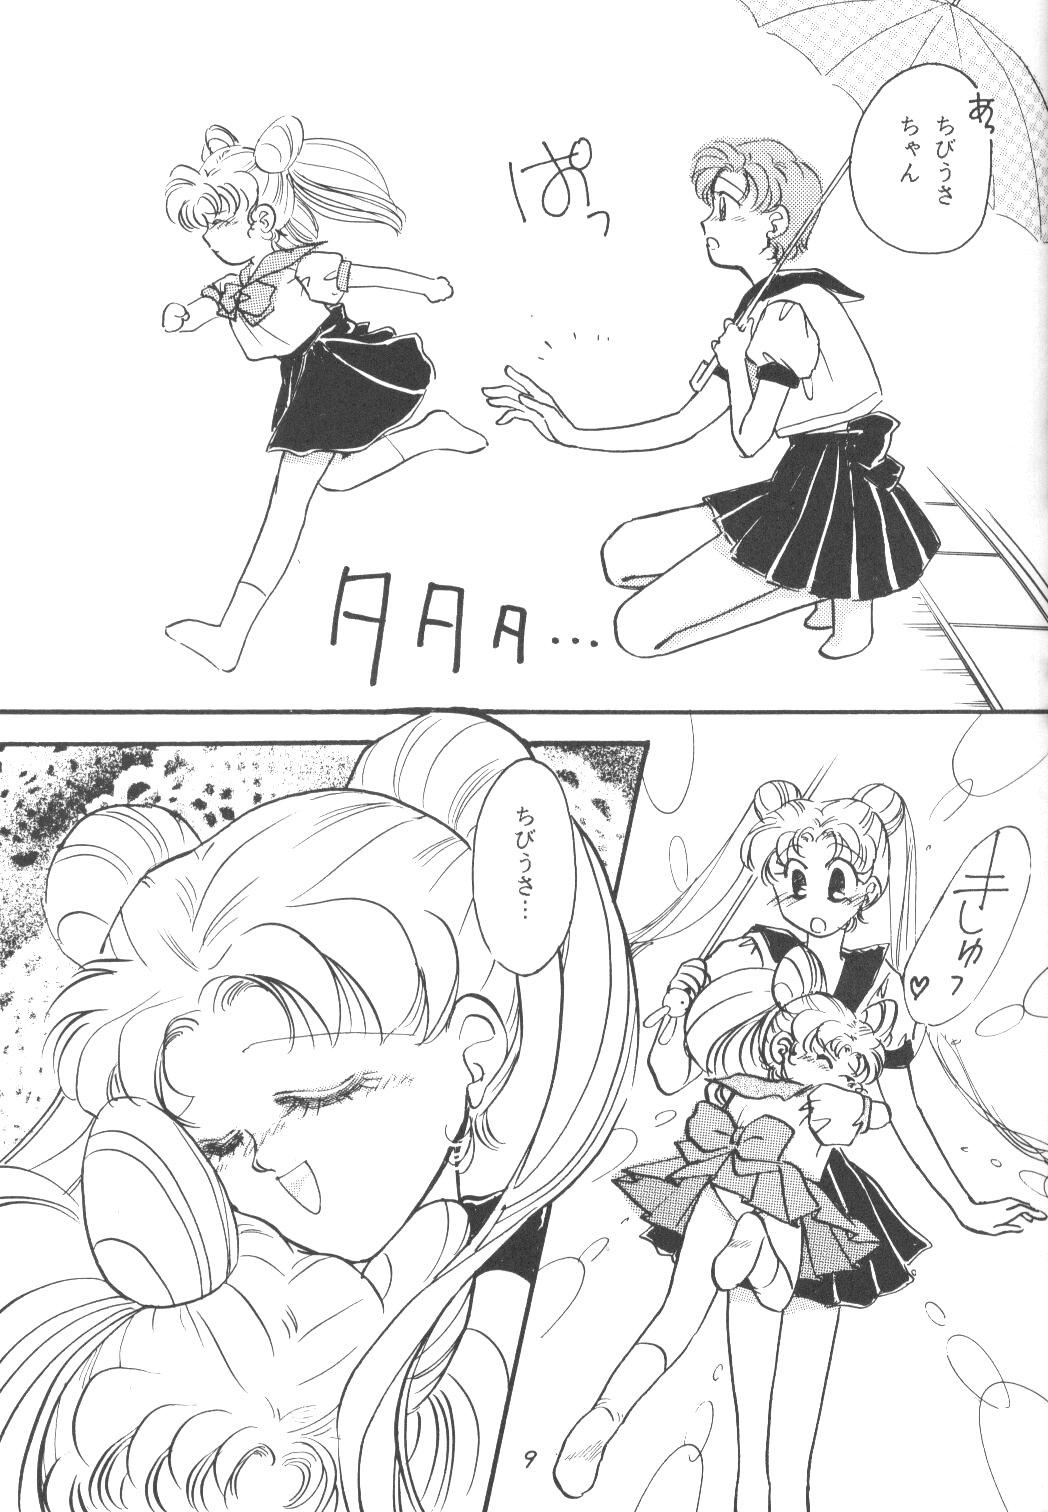 Toy Chibiusa - Sailor moon Storyline - Page 8